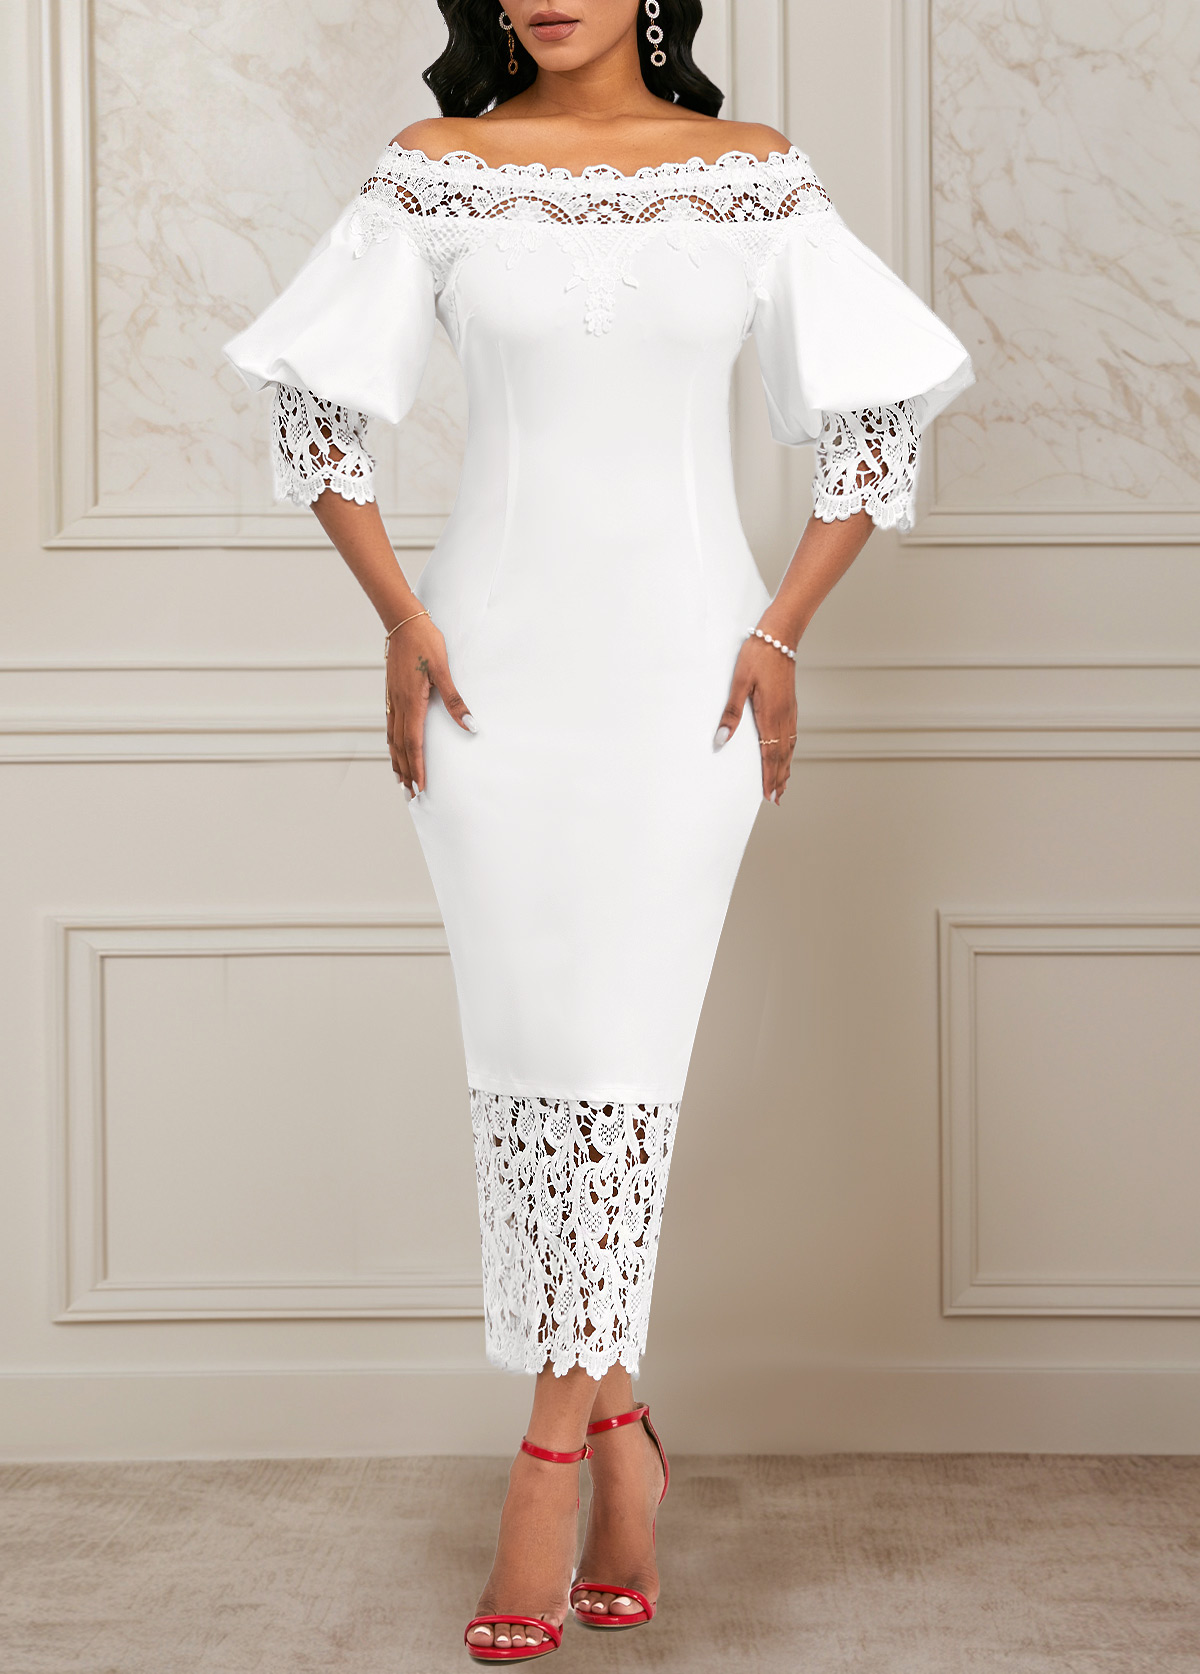 Raw White Lace 3/4 Sleeve Off Shoulder Bodycon Dress